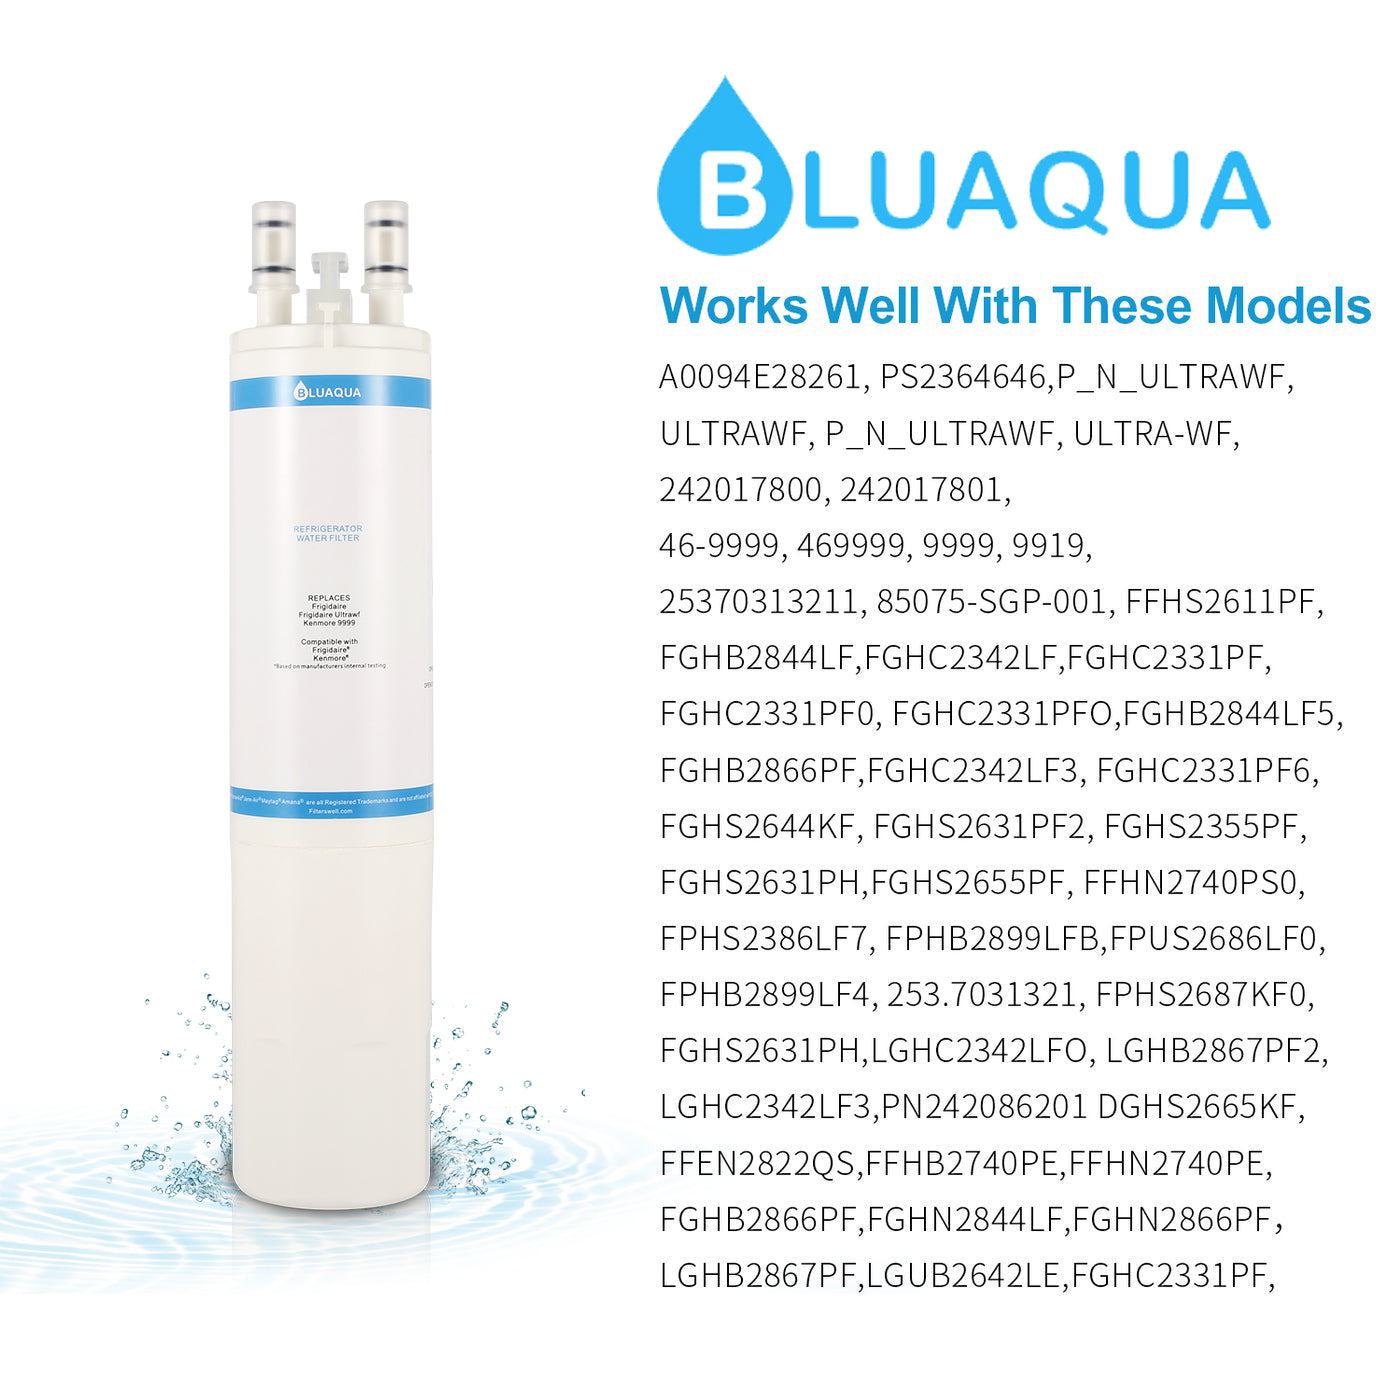 Substitute for kenmore water filter 046-9999  with Bluaqua ultrawf water filters